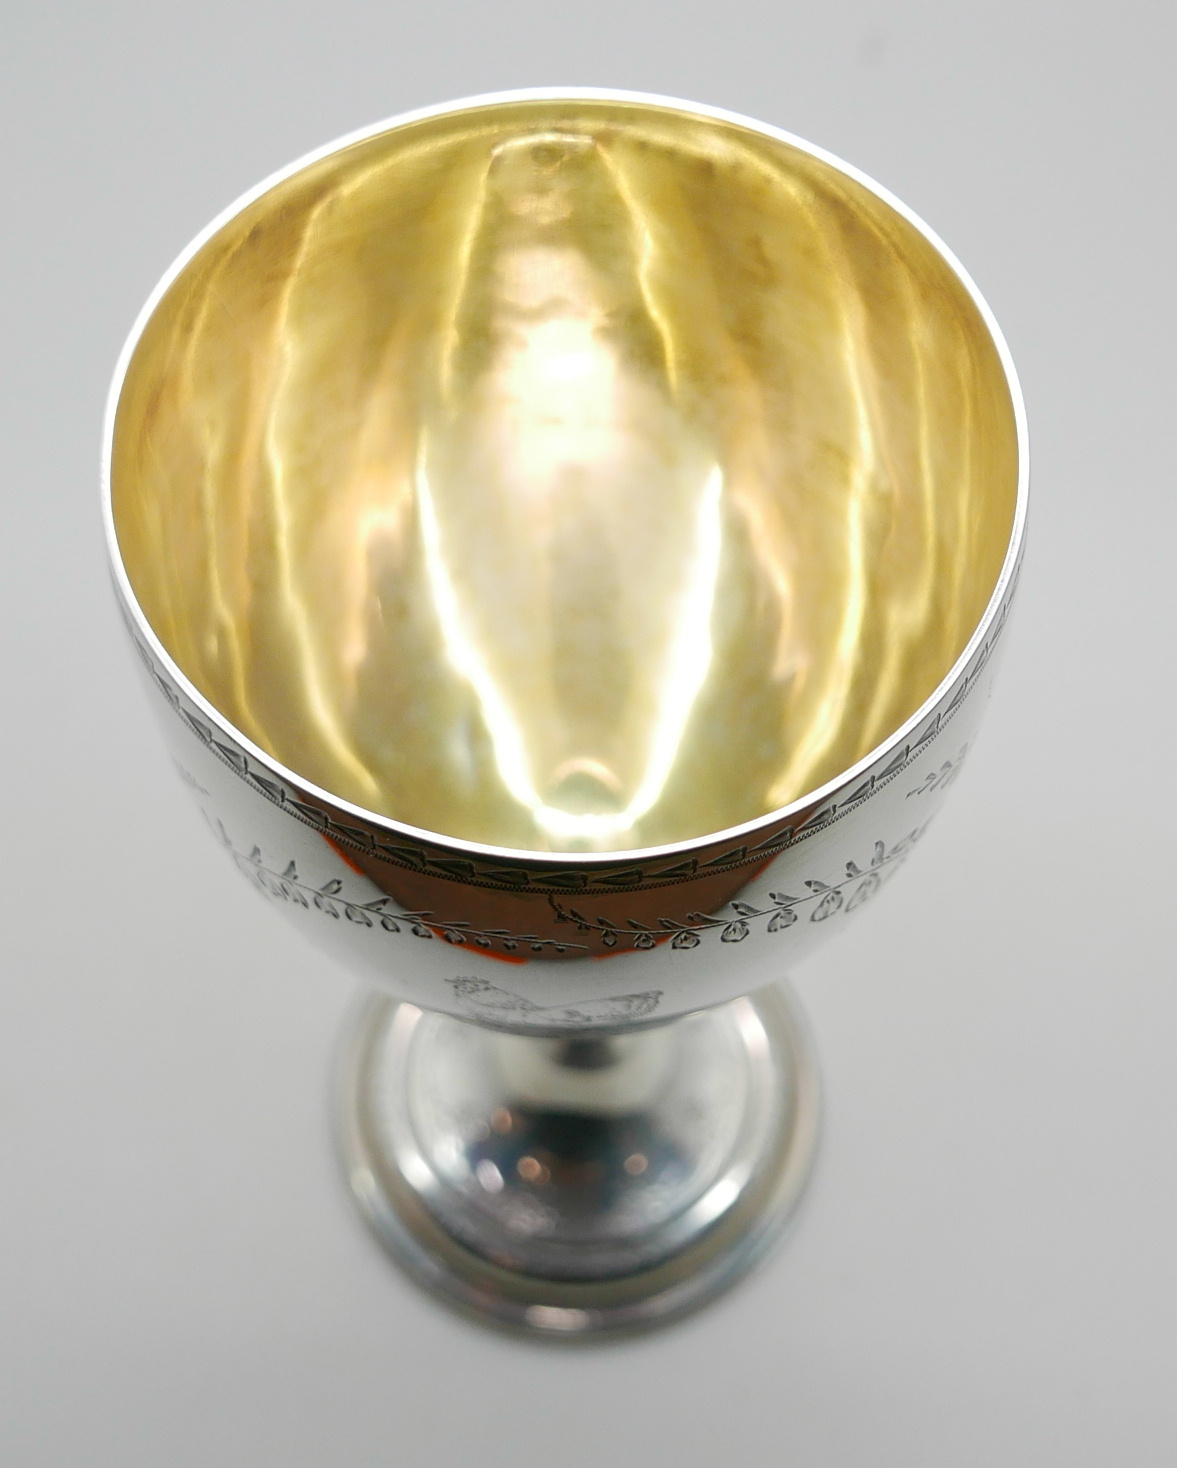 A Victorian silver goblet with cockerel detail and marked 'Kaiser', London 1856, Elkington & Co., - Image 5 of 6